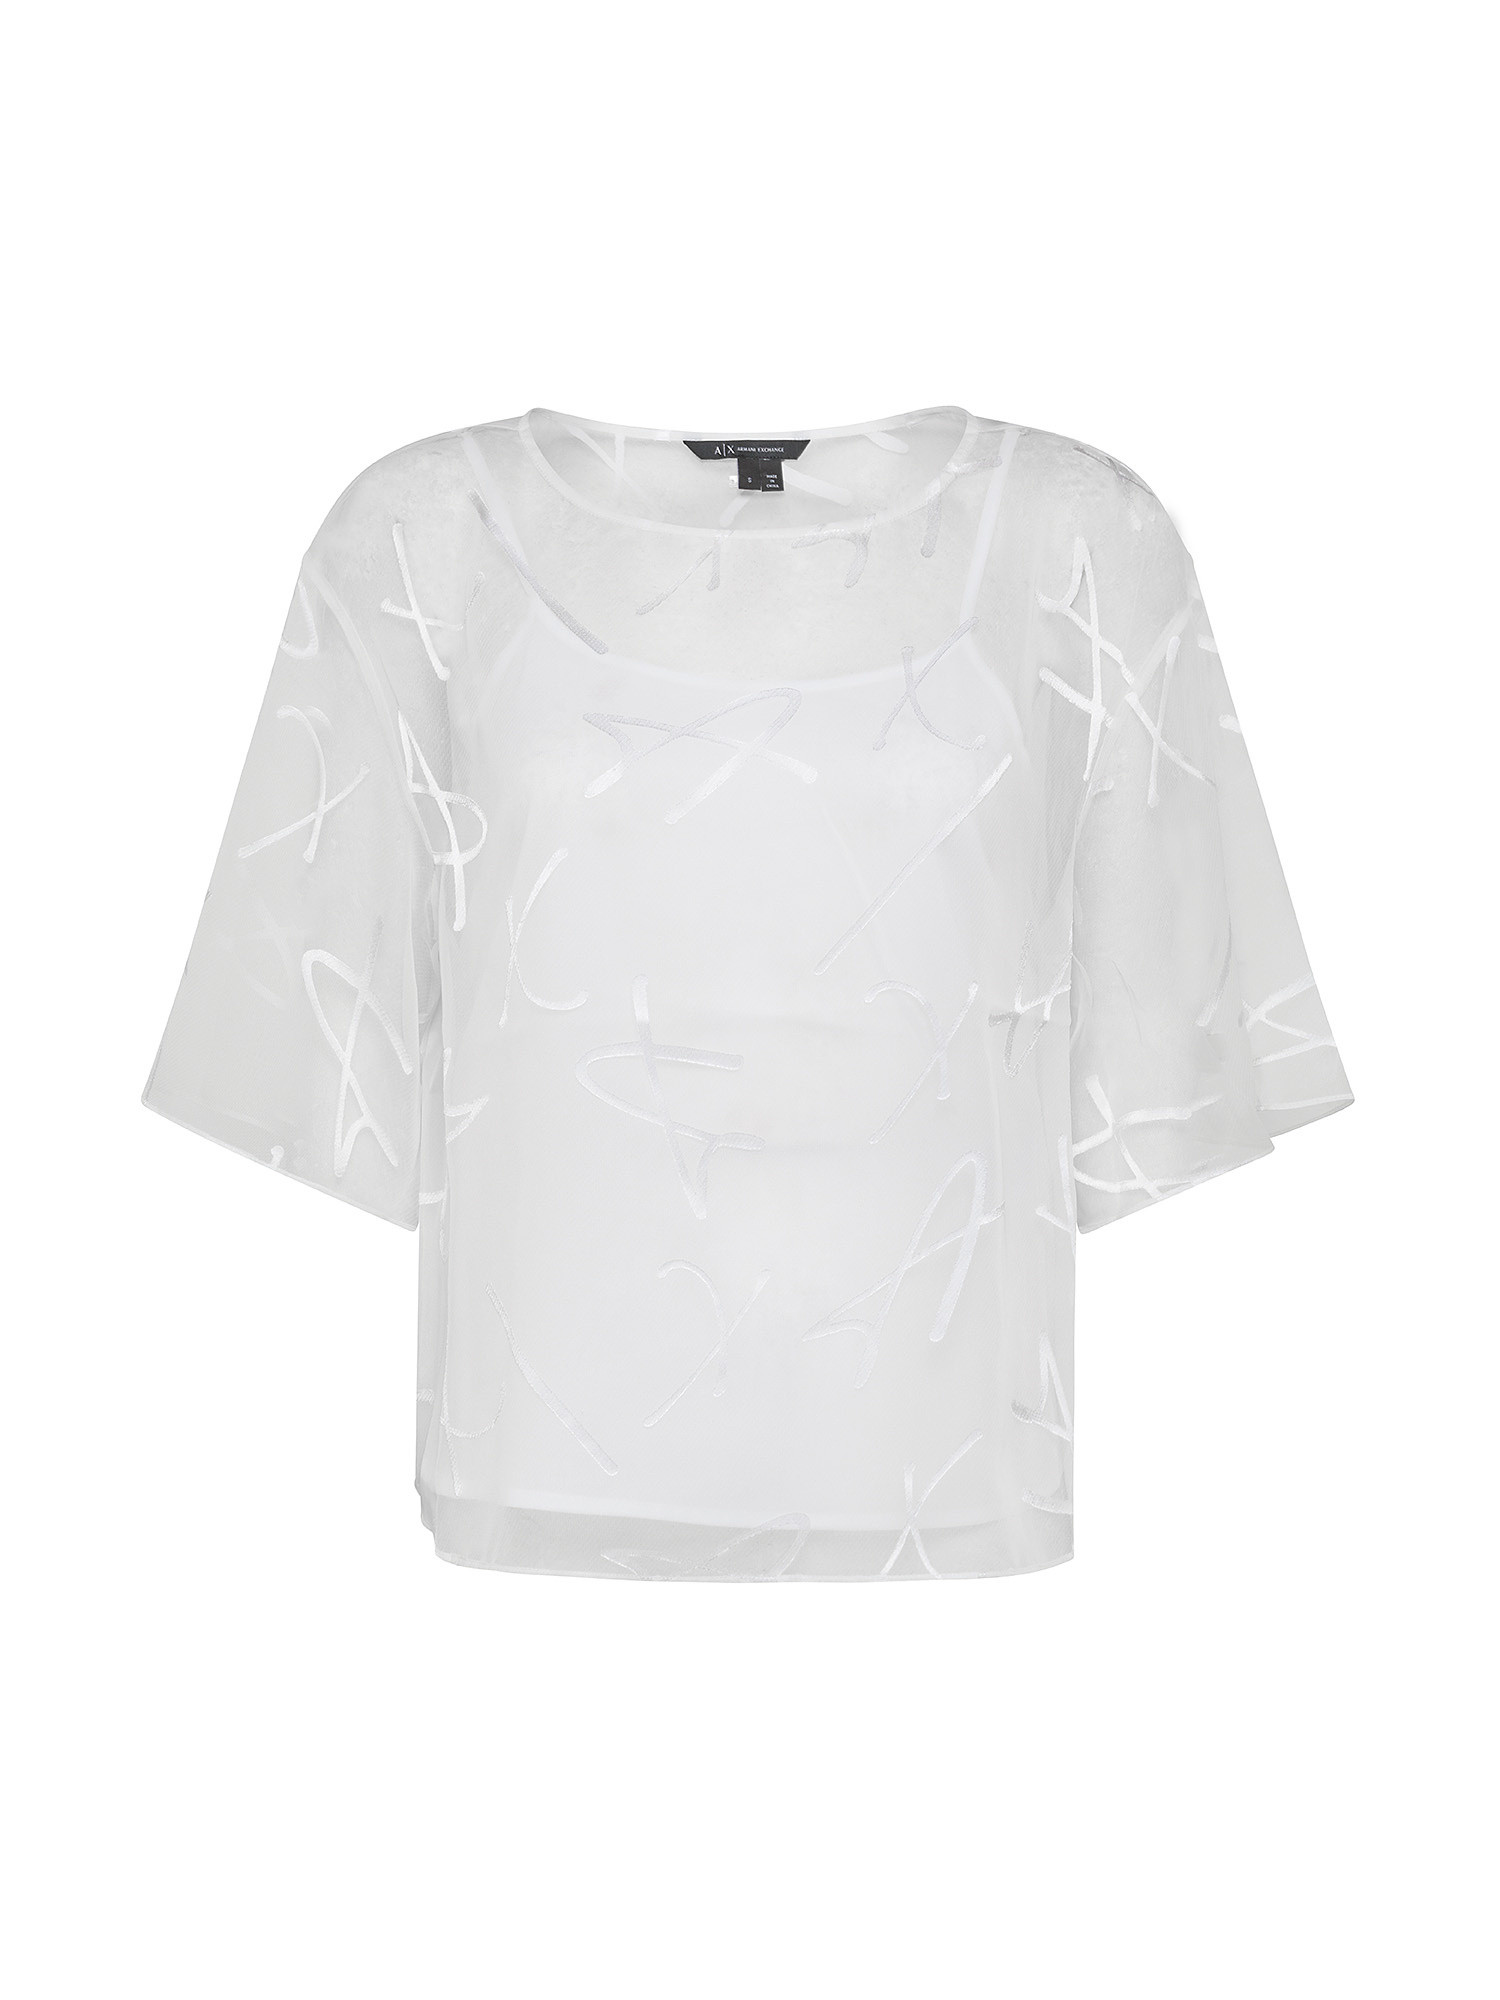 Armani Exchange - Blusa con scritta logo all over, Bianco, large image number 0